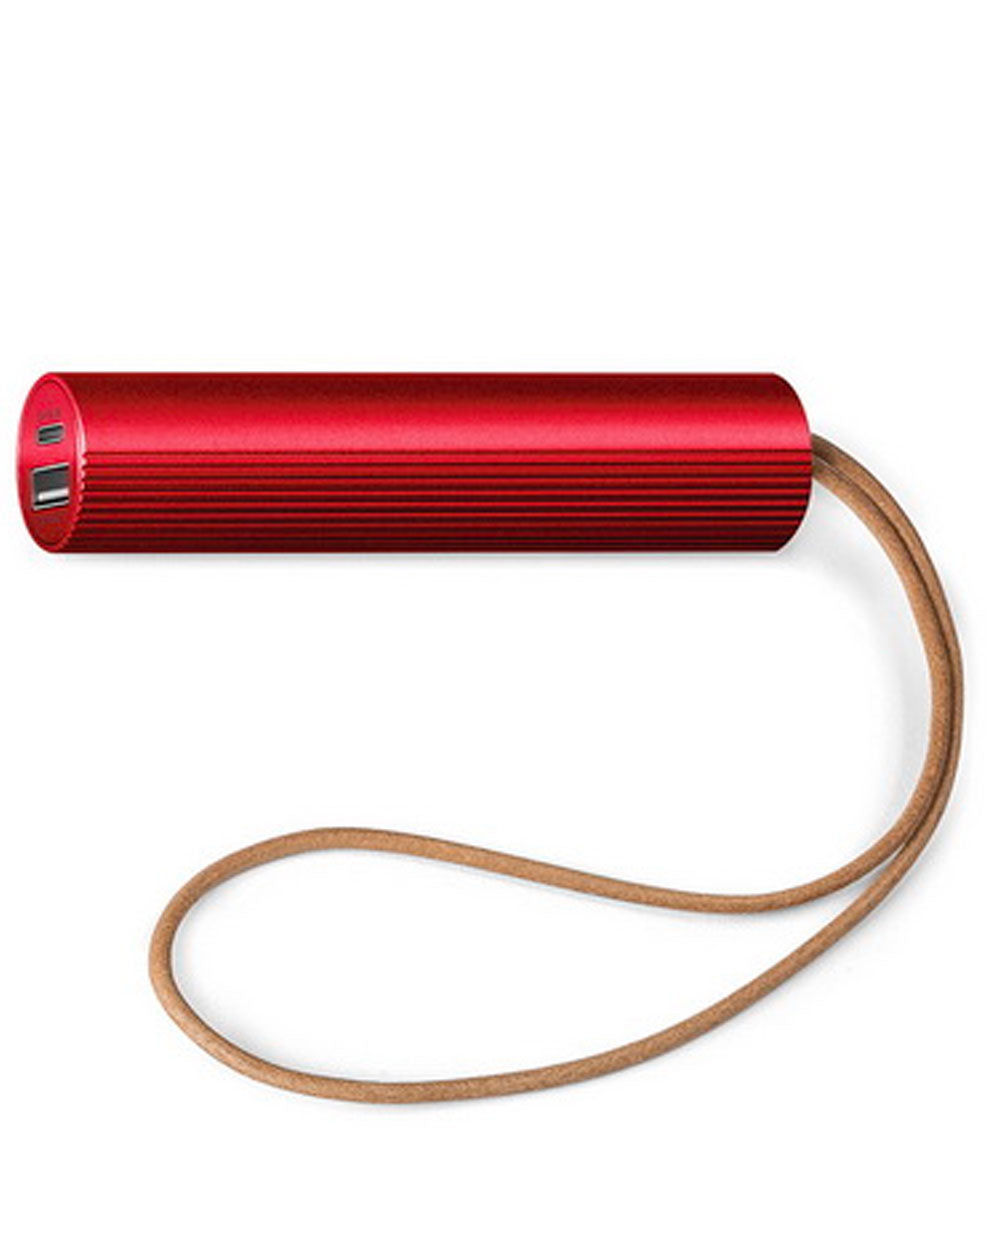 Fine Tube Power Bank in Red